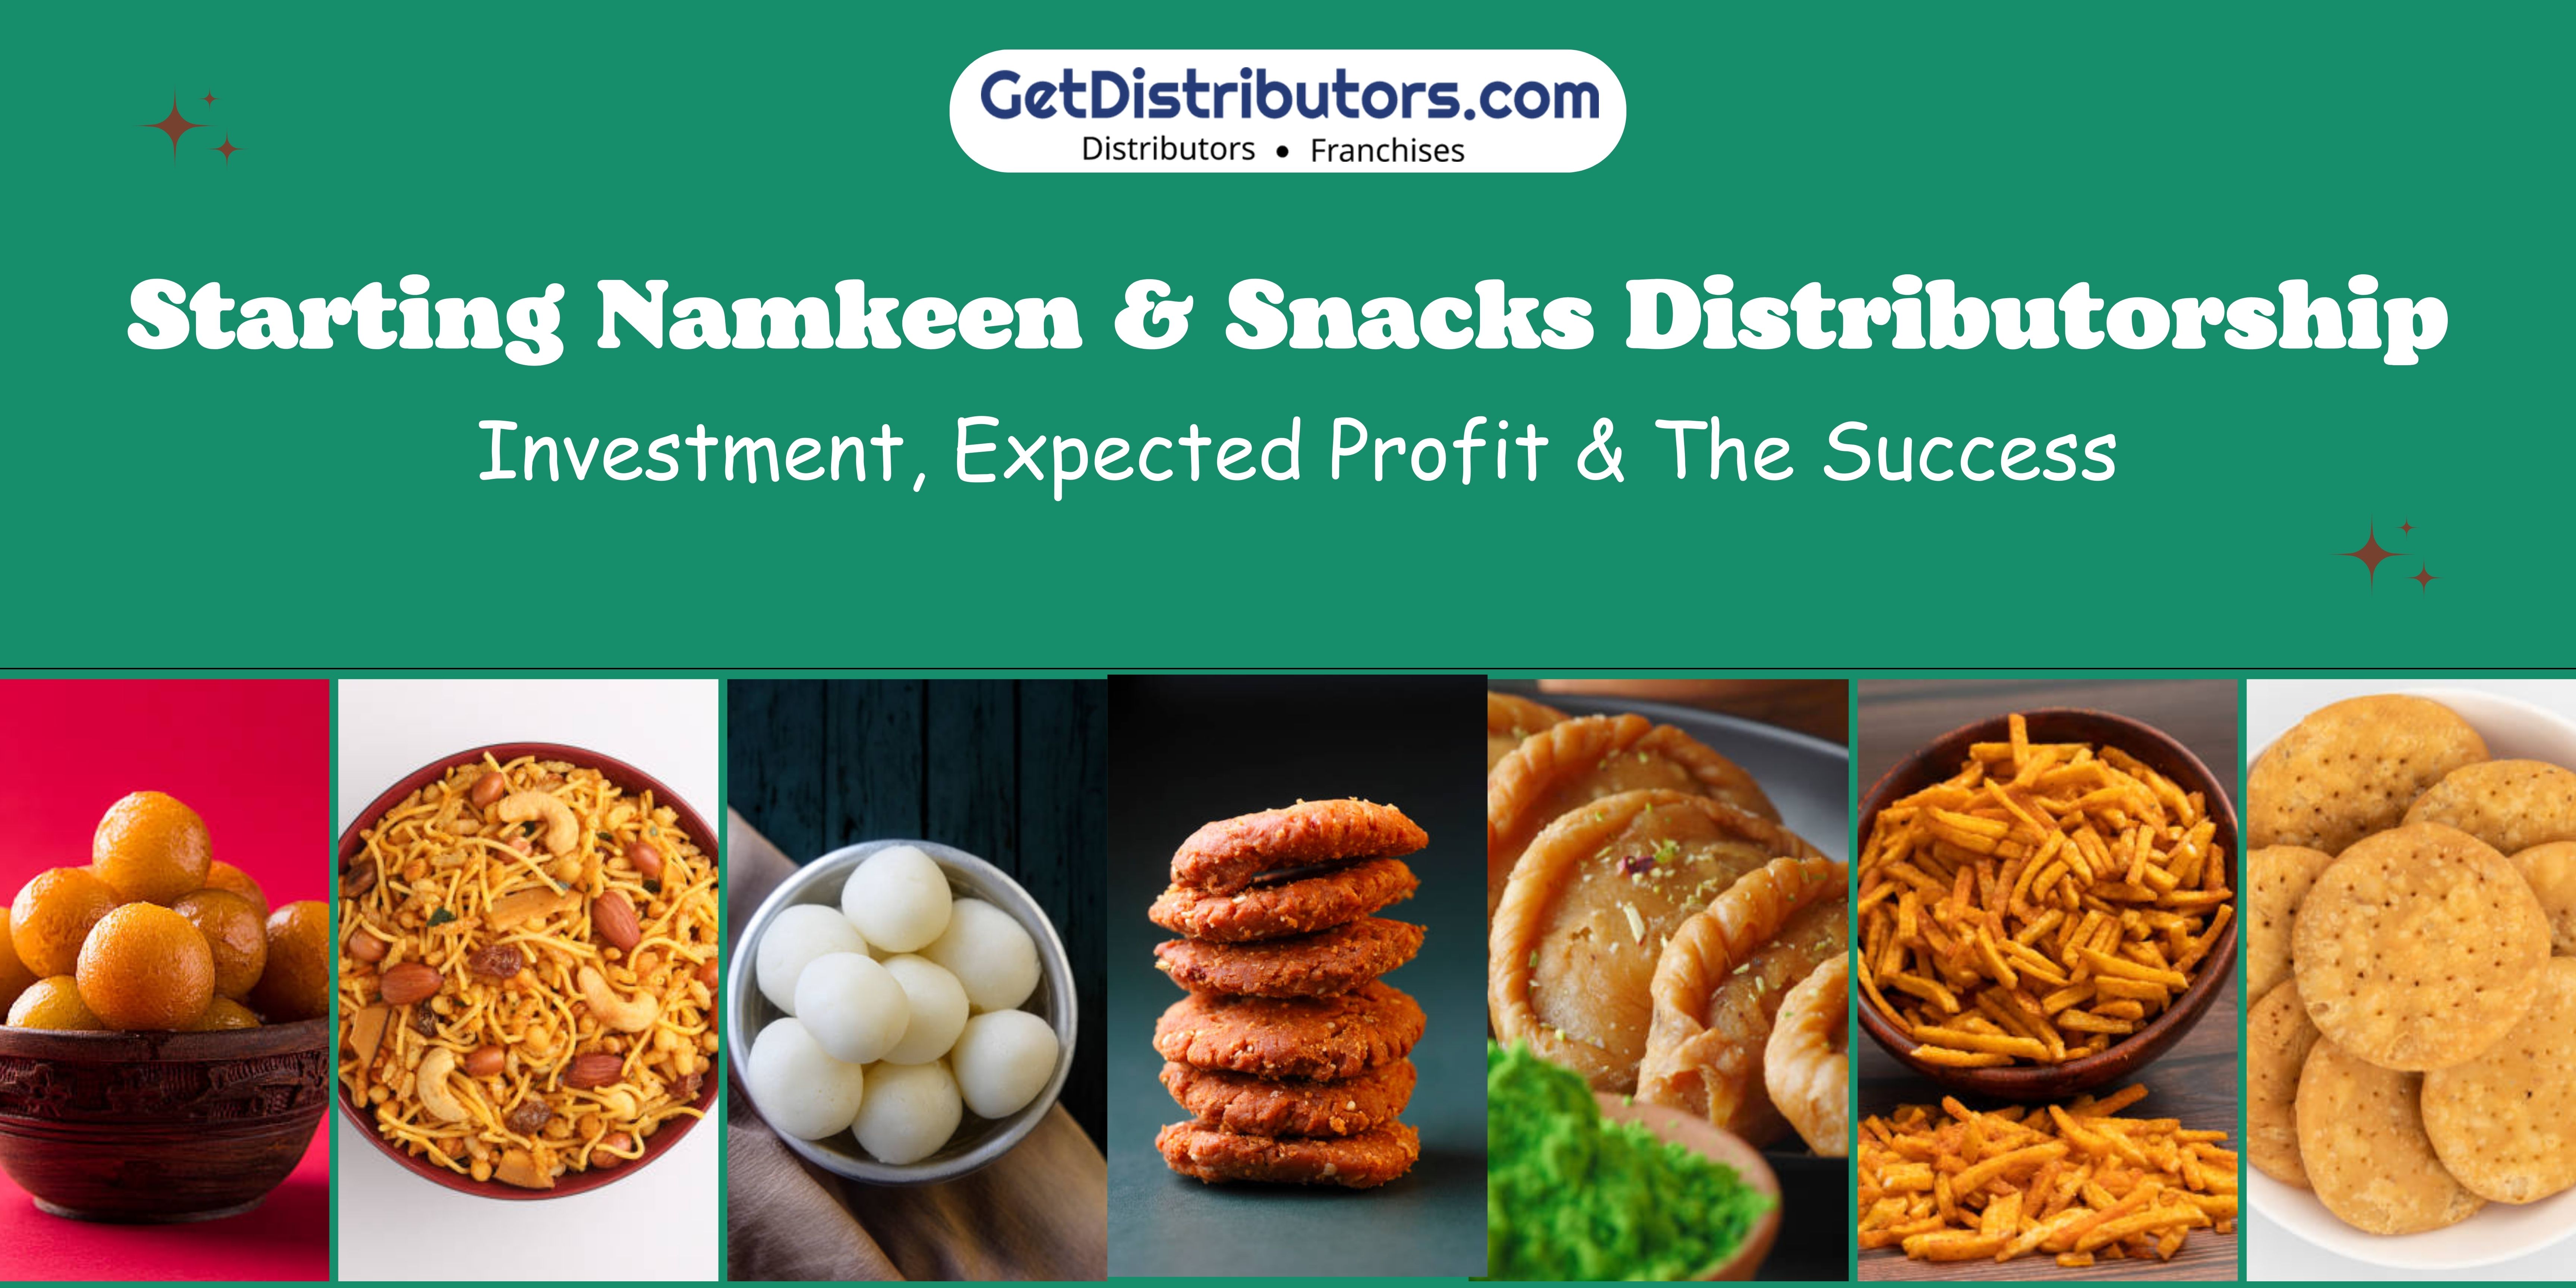 Starting Namkeen & Snacks Distributorship: Investment, Expected Profit & The Success